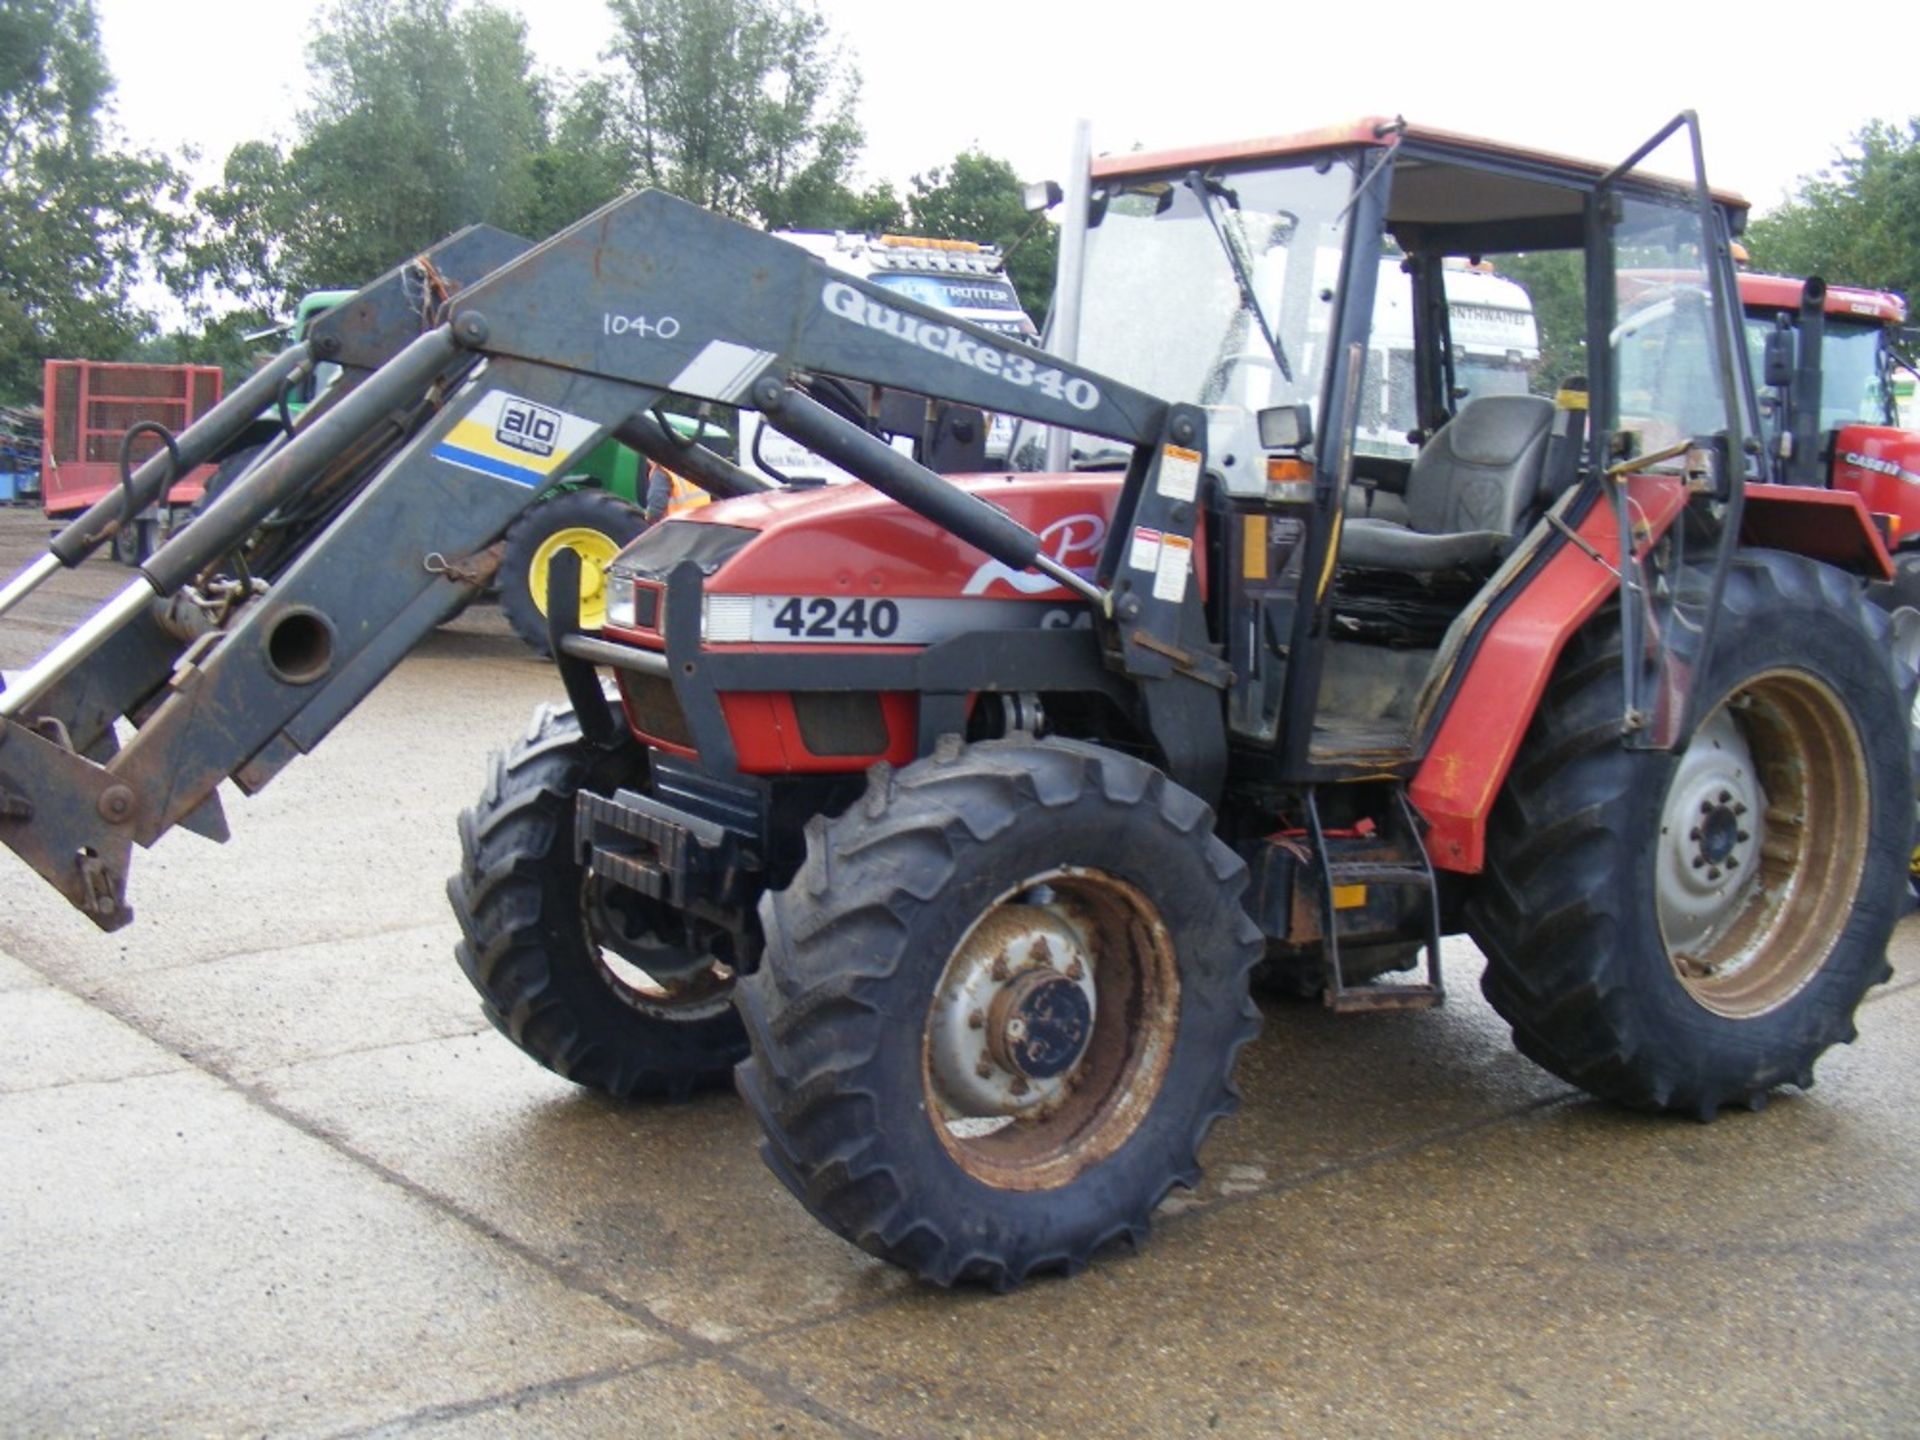 Case International 4240 Pro 4wd Tractor with Quicke 340 Loader. V5 will be supplied. Reg. No. P307